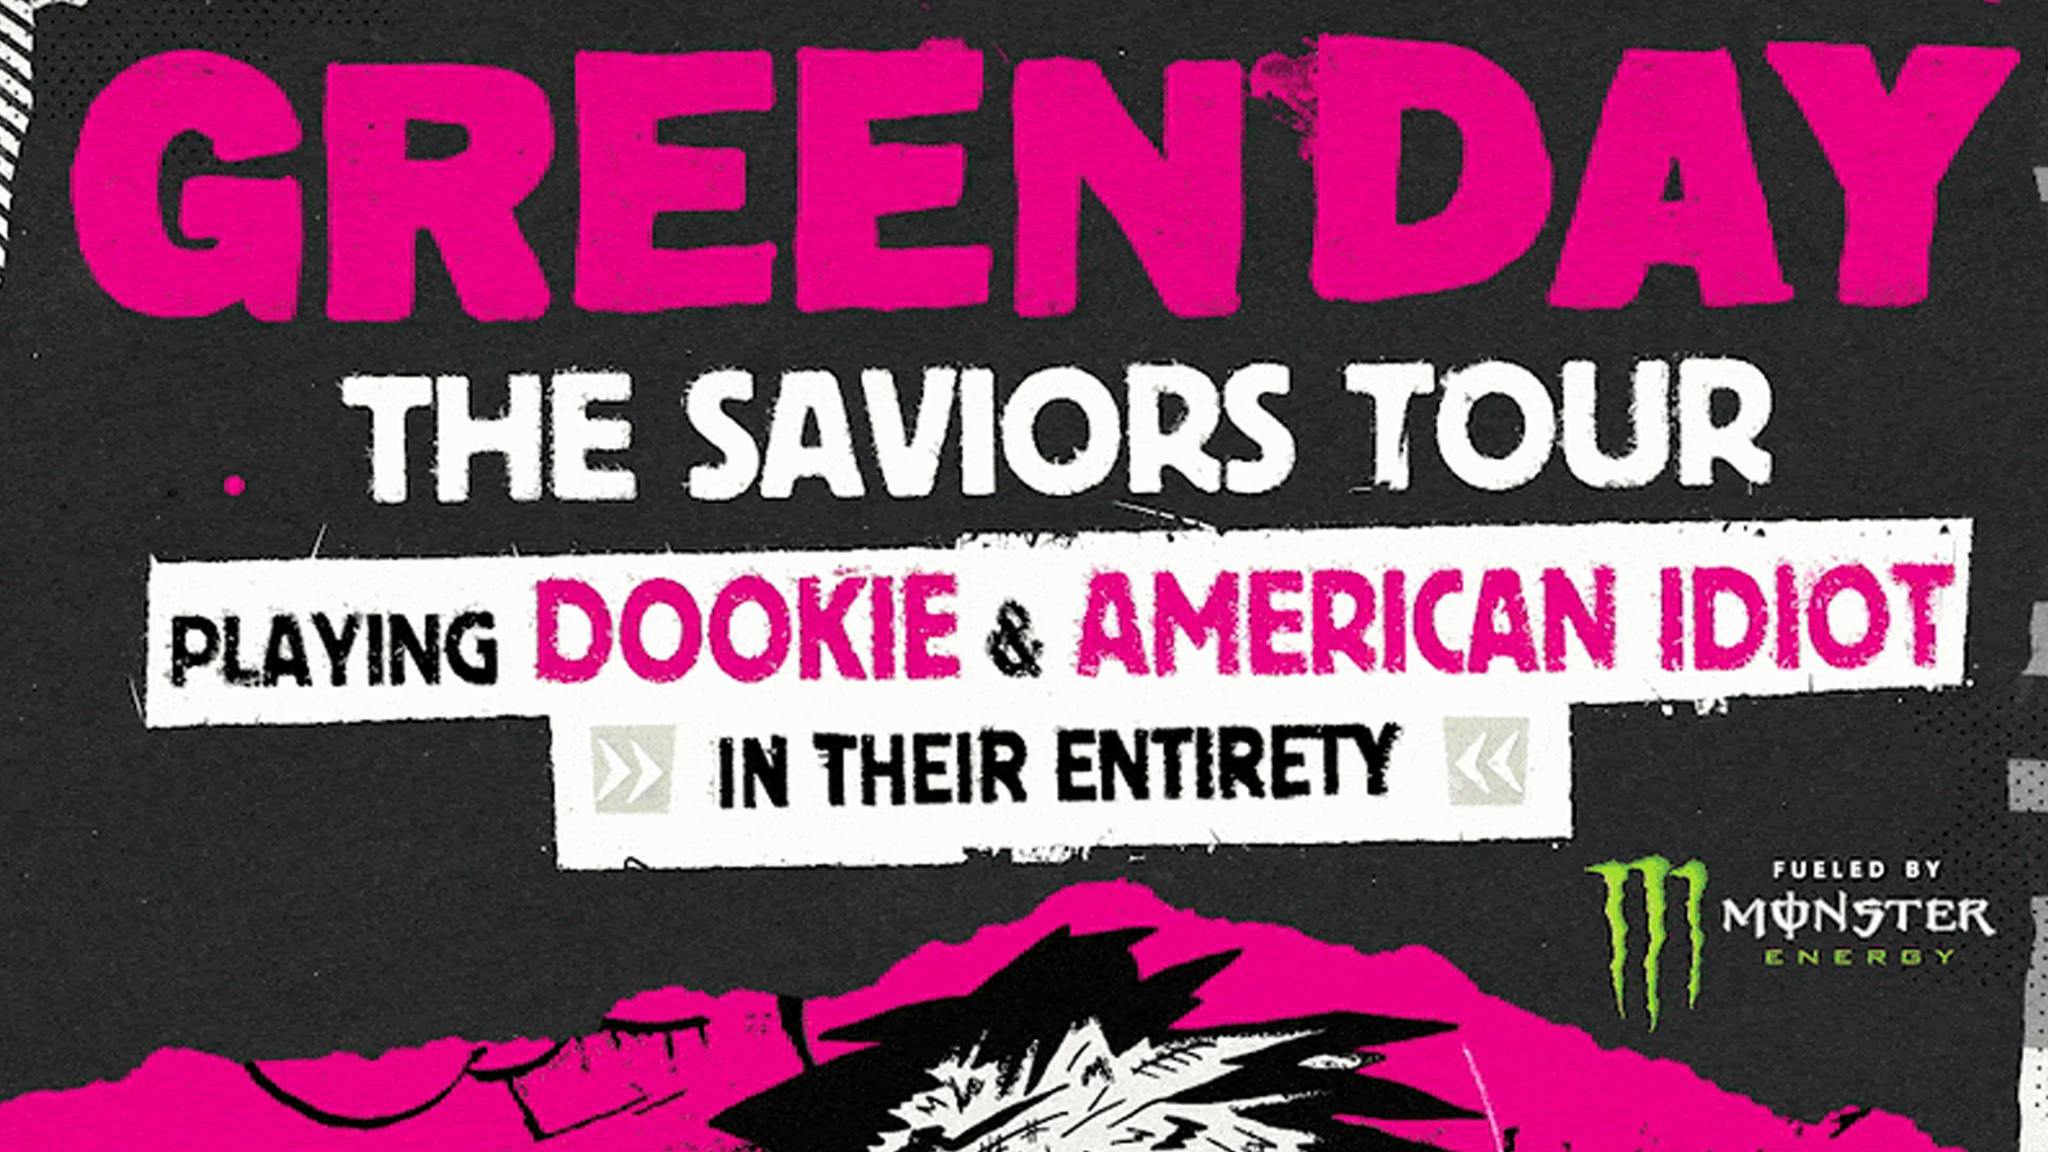 Green Day confirm they’ll play Dookie and American Idiot in full on tour